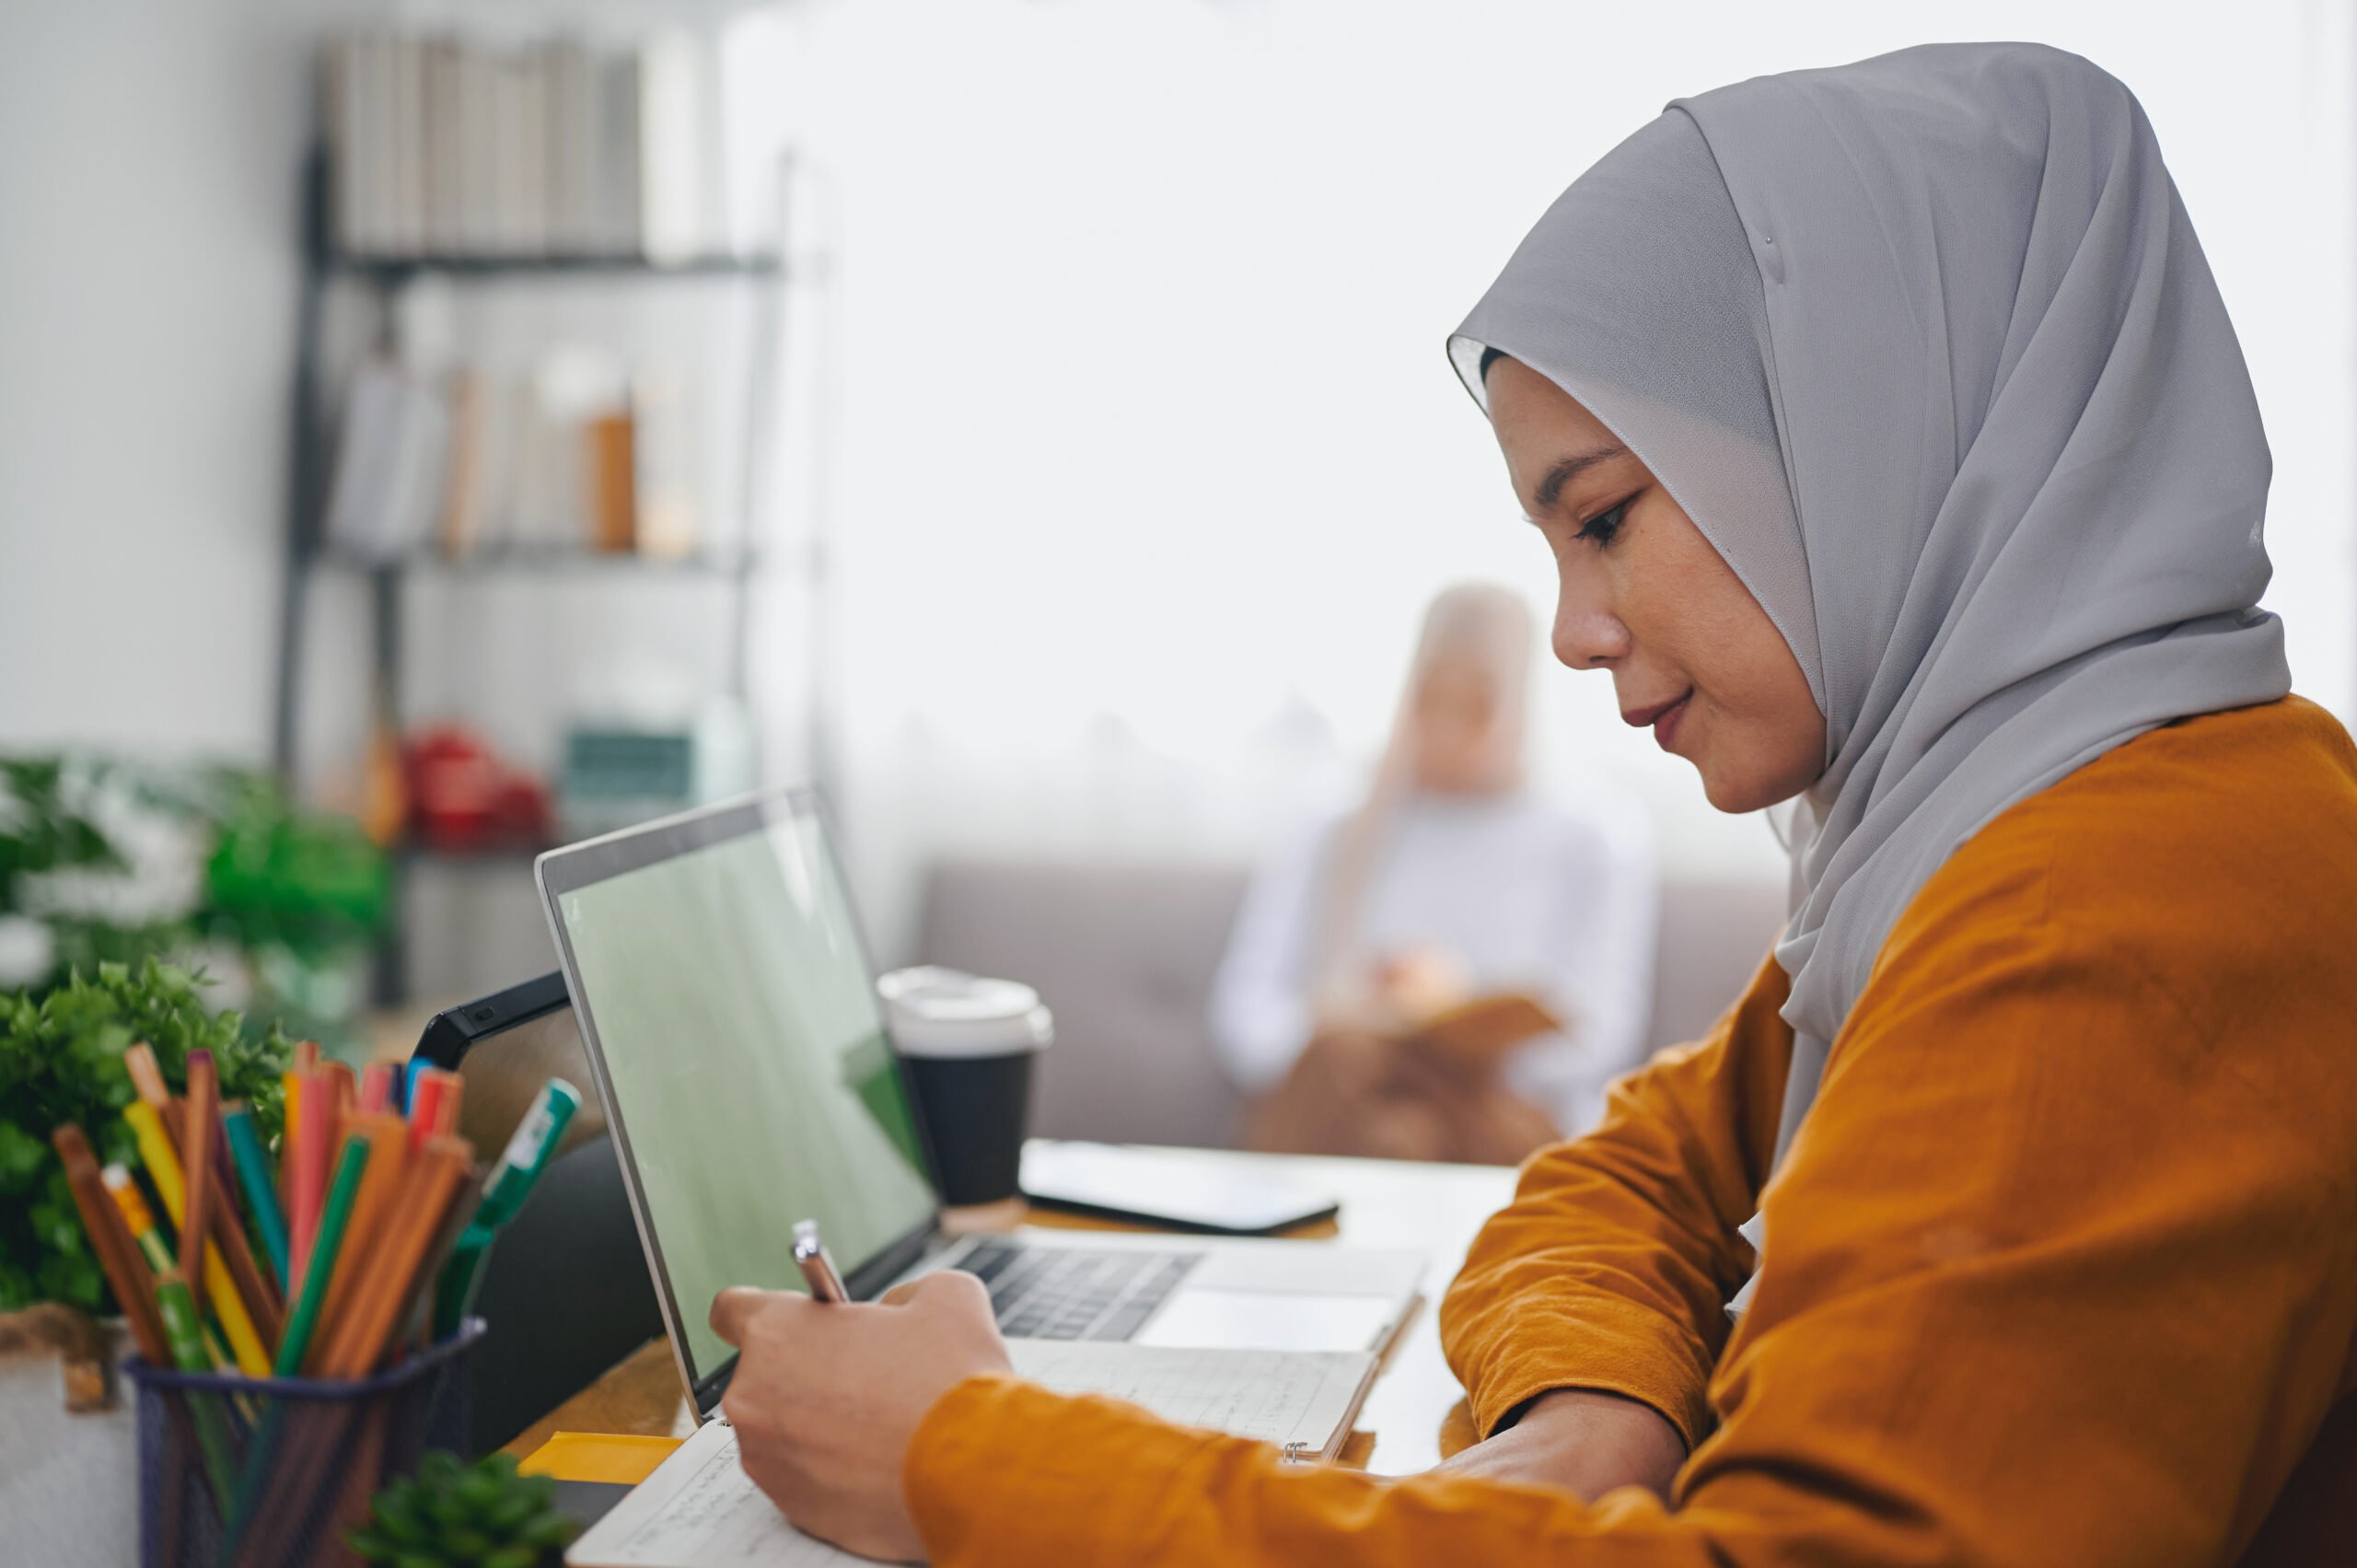 Islamic woman wearing hijab headscarf studying online with laptop